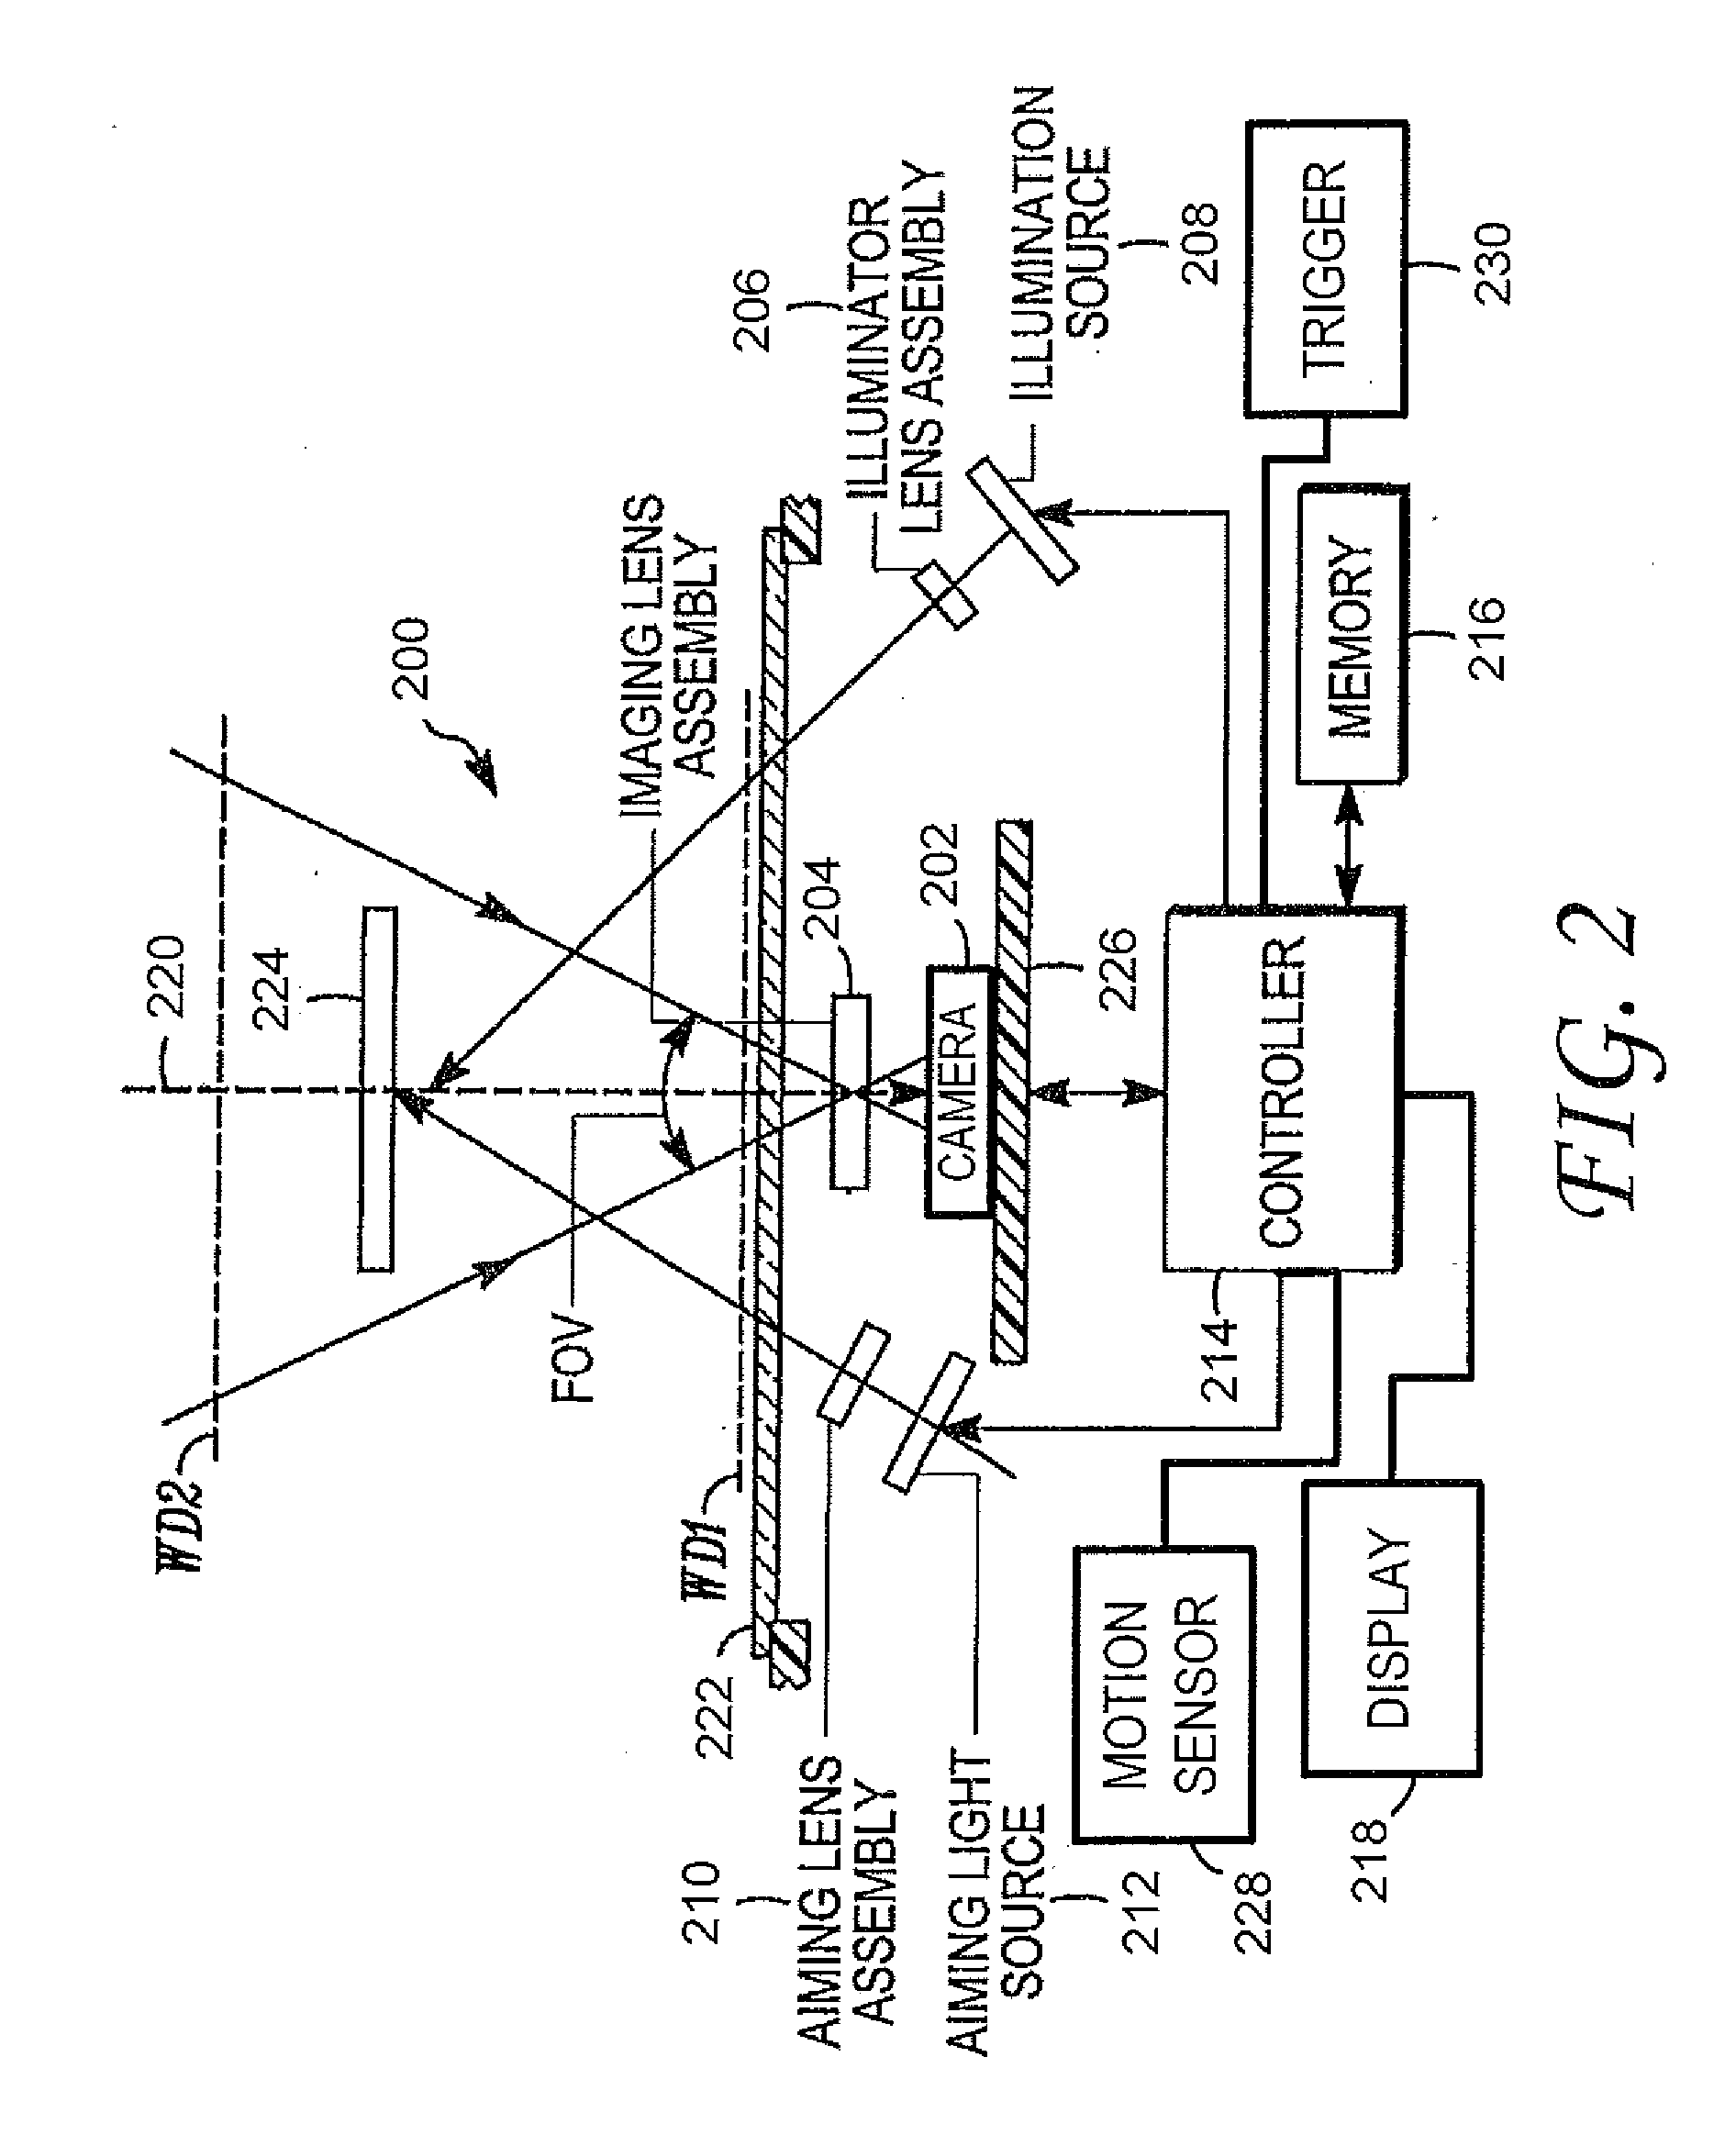 Method and apparatus for enhanced document capture